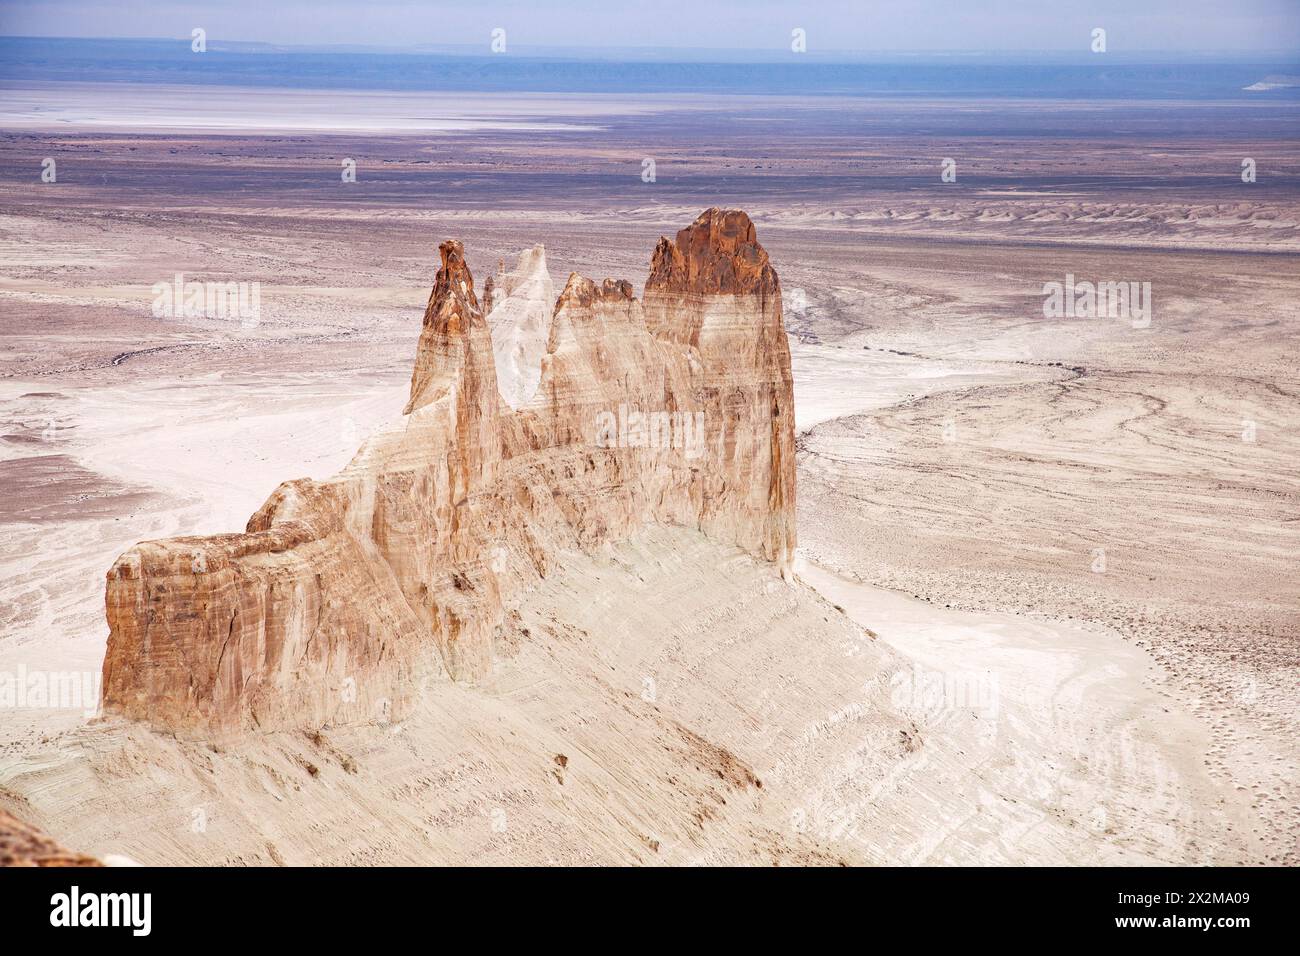 Bozzhyra tract in Kazakhstan, a scenic and arid desert landscape featuring dramatic rock formations and sediment layers. Stock Photo